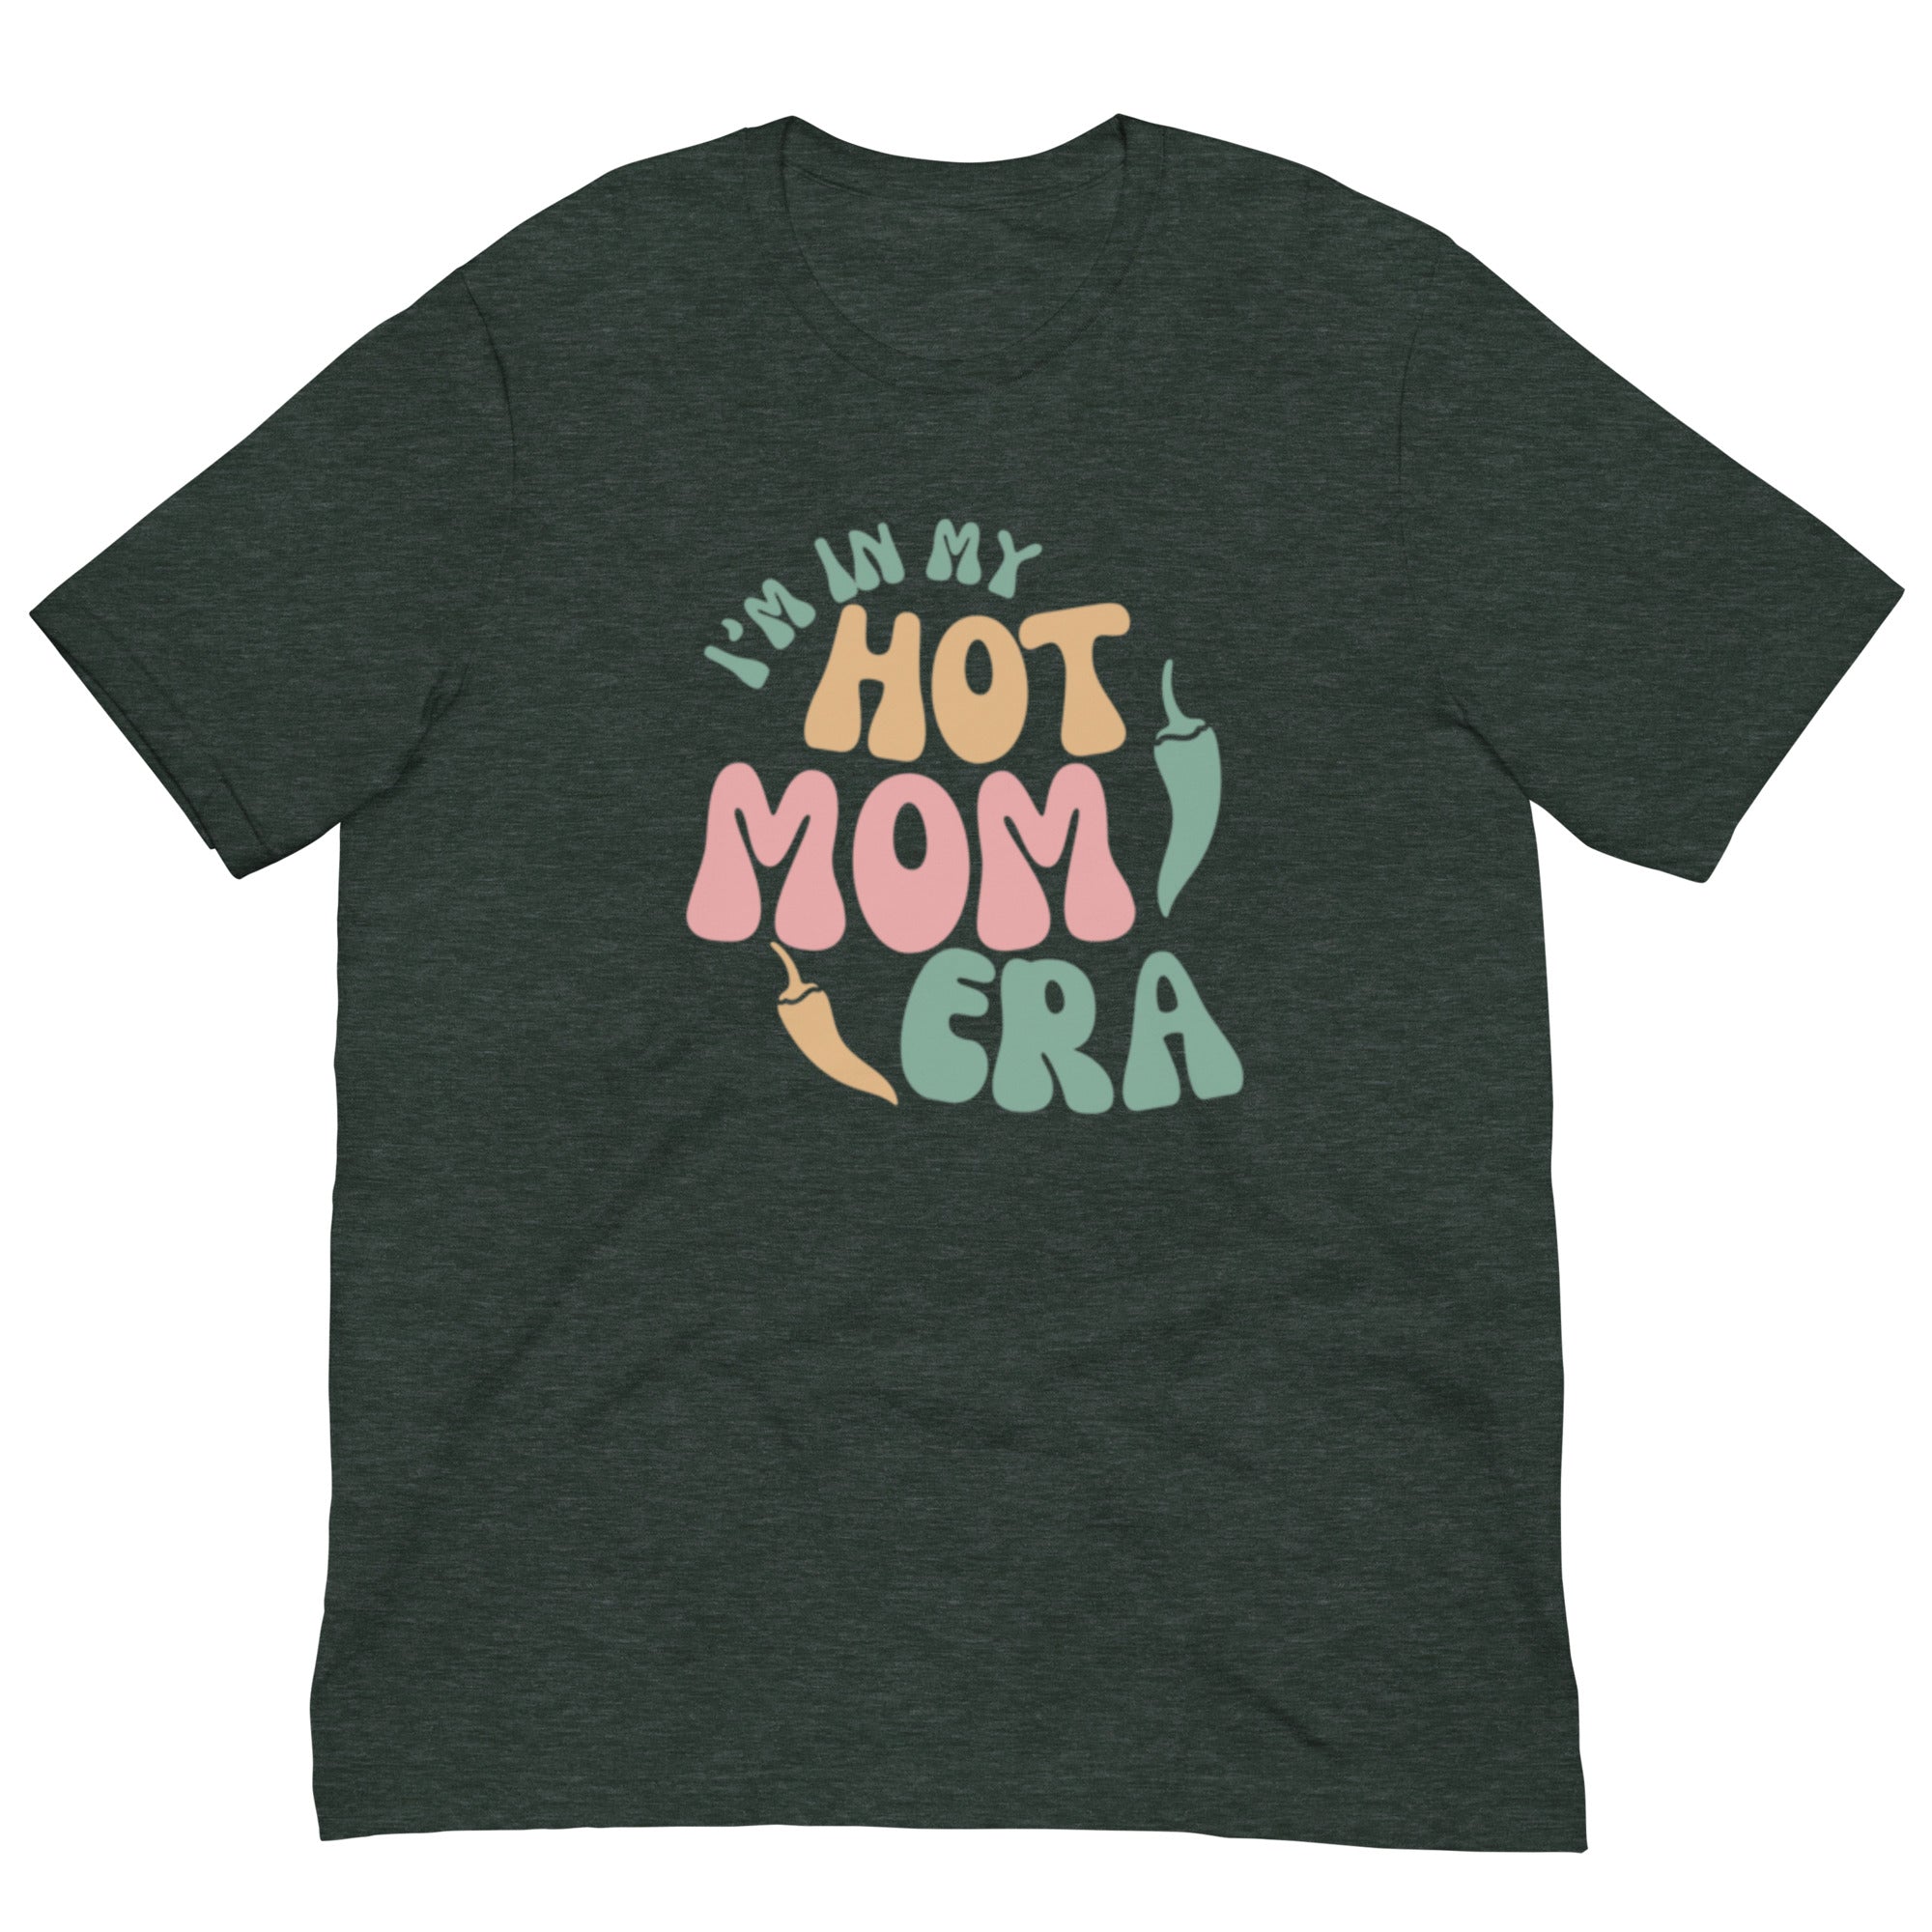 A dark gray, breathable Era Shirt with the phrase "i'm in my hot mom era" printed in colorful, playful lettering across the chest.